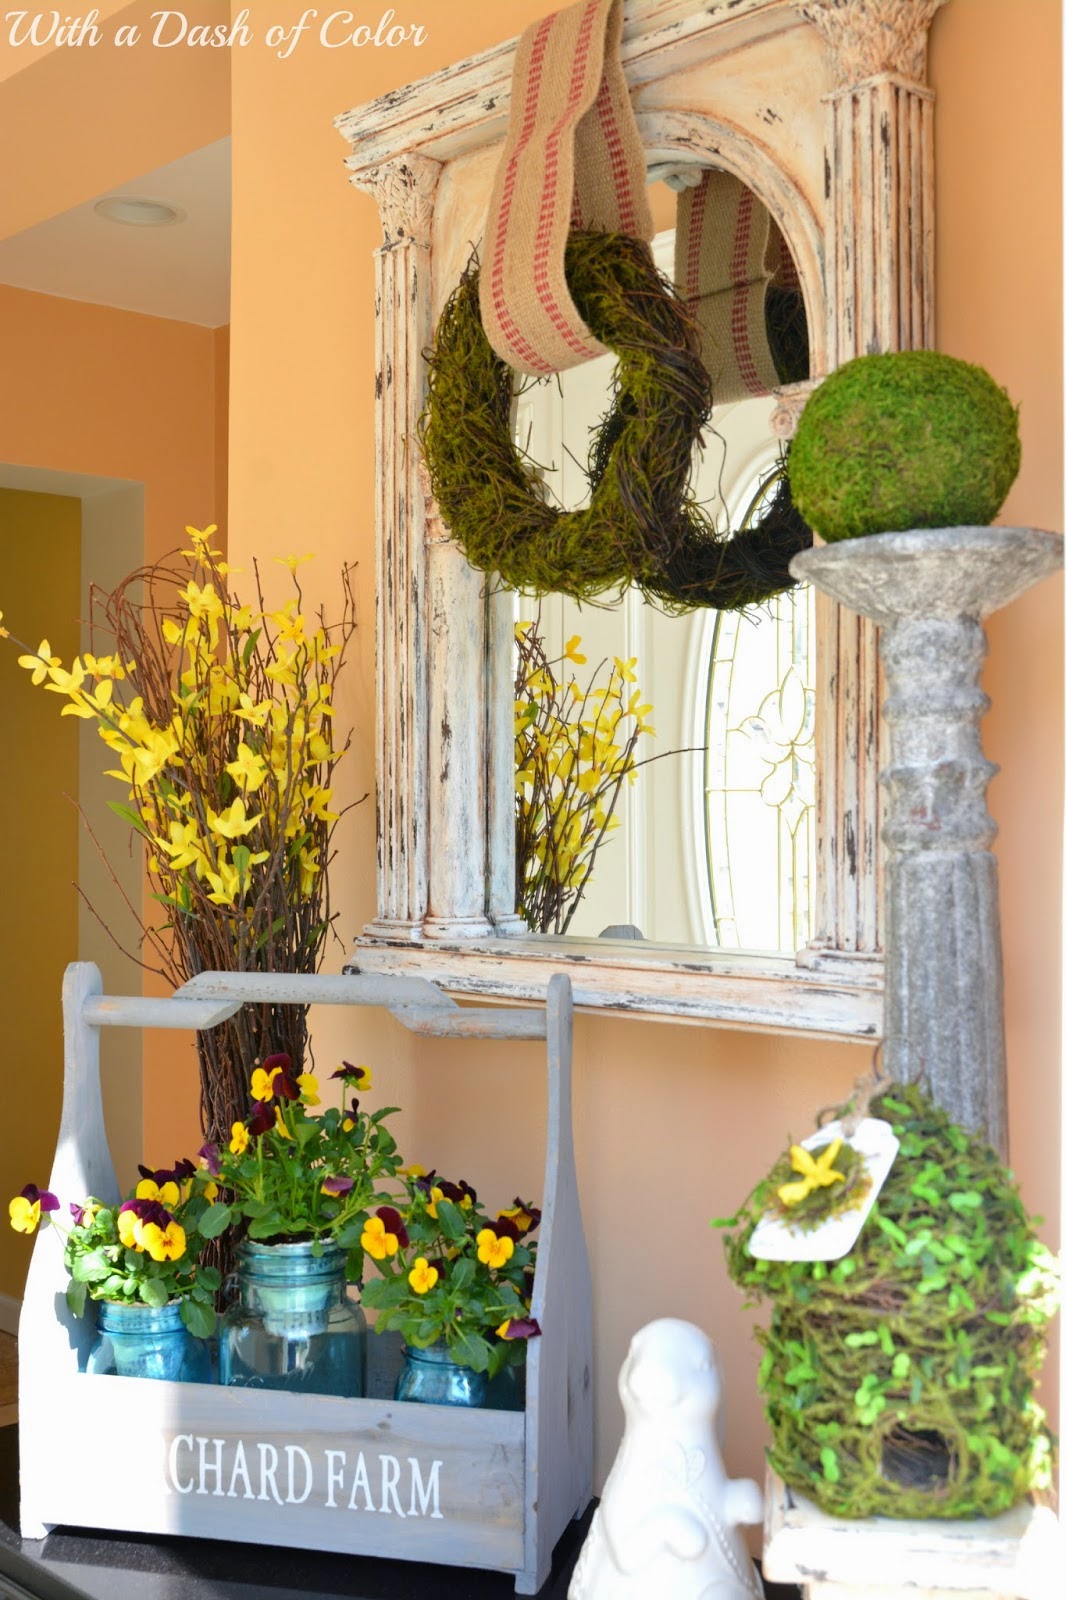 http://withadashofcolor.blogspot.com/2014/05/spring-greens-in-foyer.html